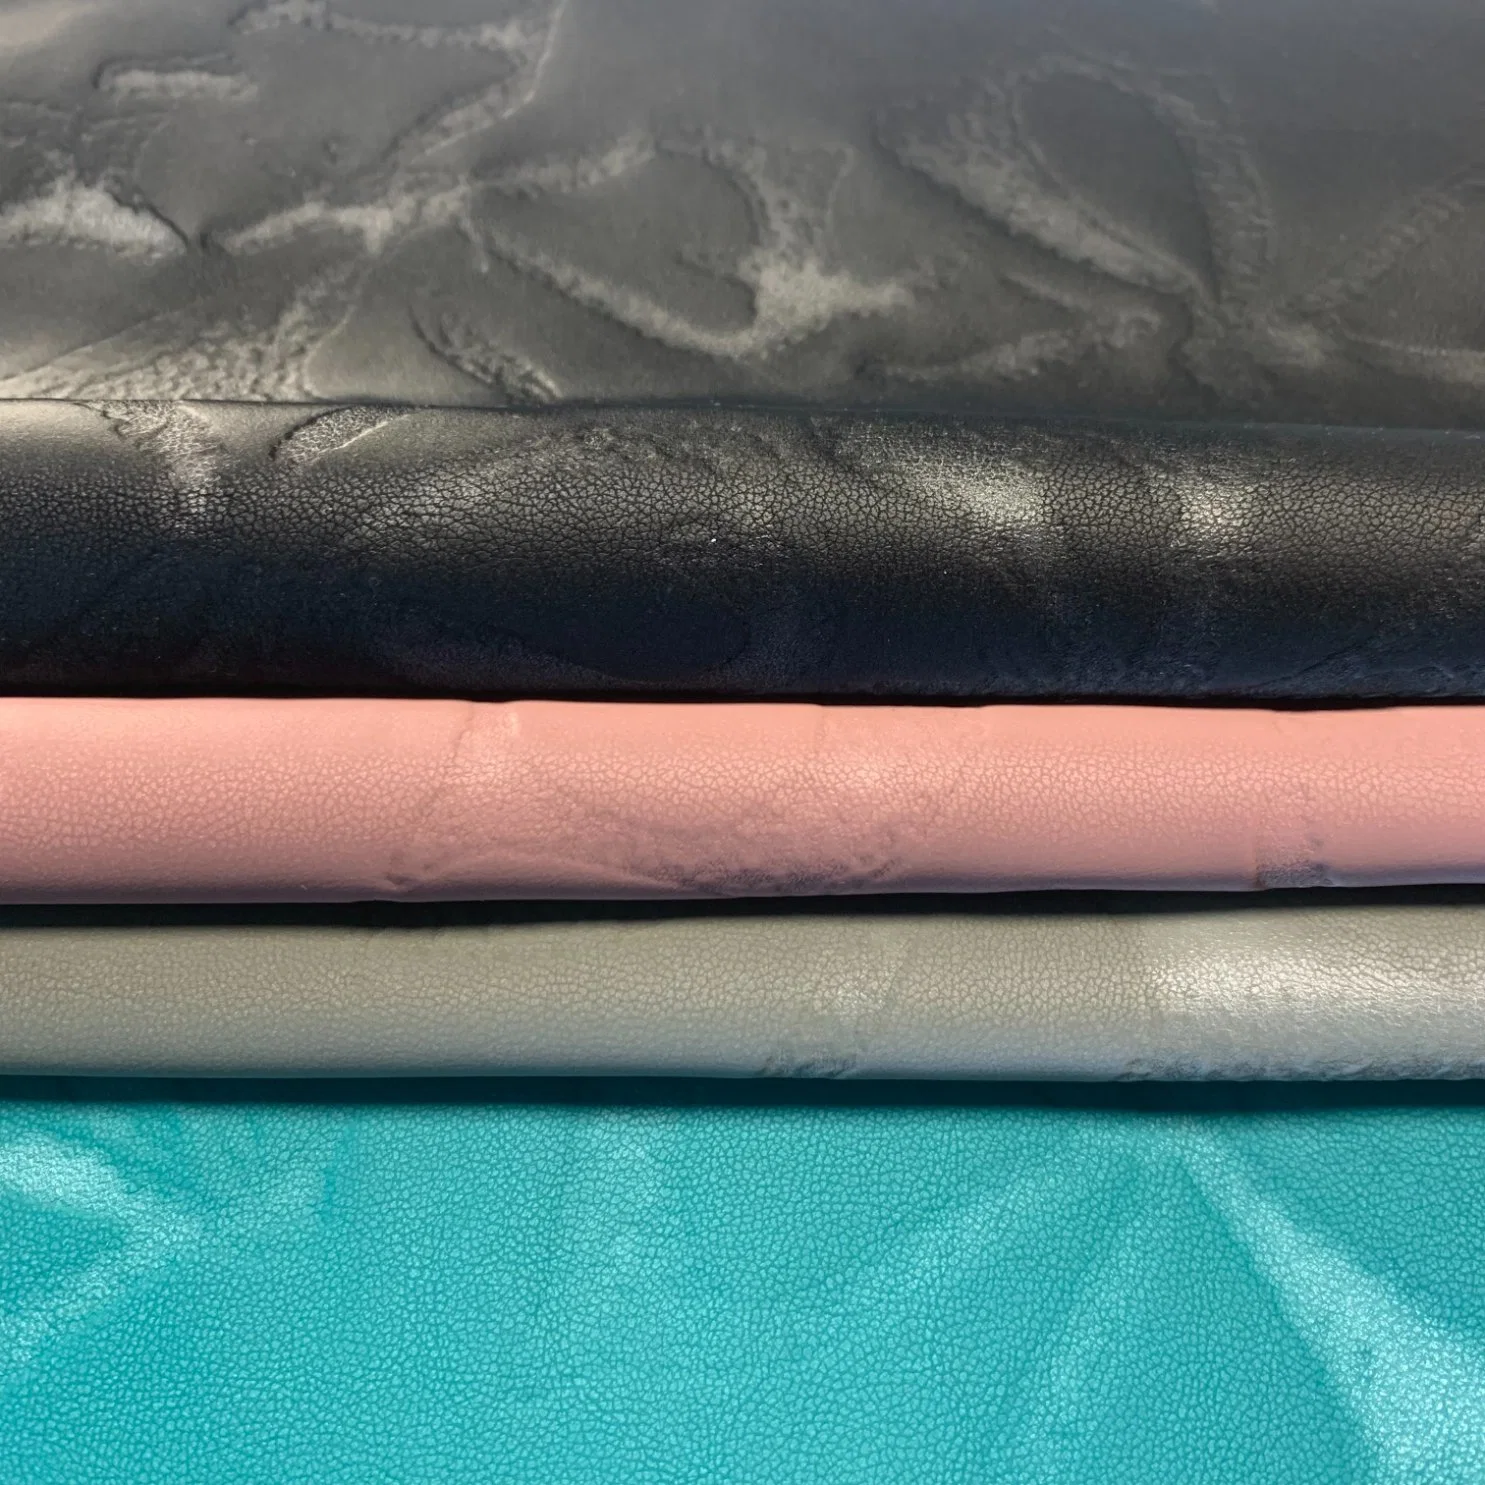 PVC Synthetic Leather for Bag, PVC Artificial Leather Luggage Garments Material